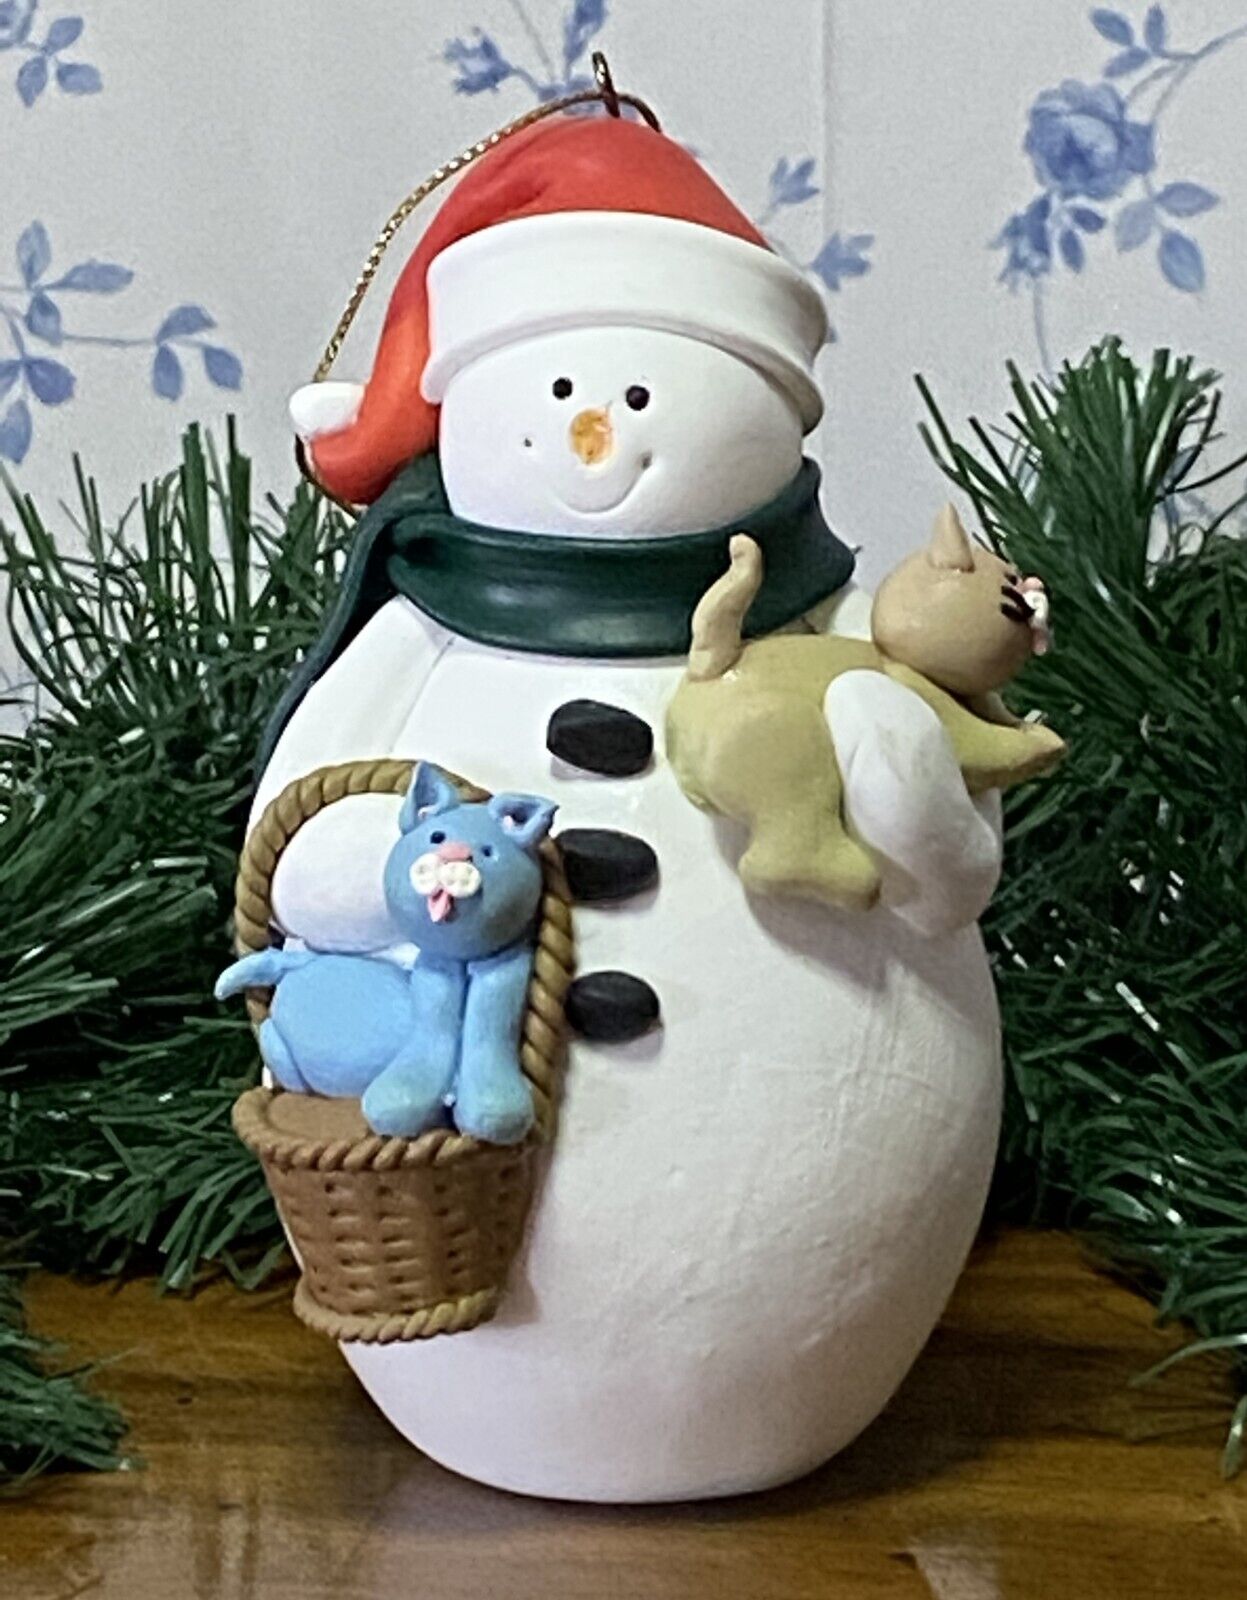 Adorable Snowman Holding 2 Cats Ornament or Figurine Cat Kitten